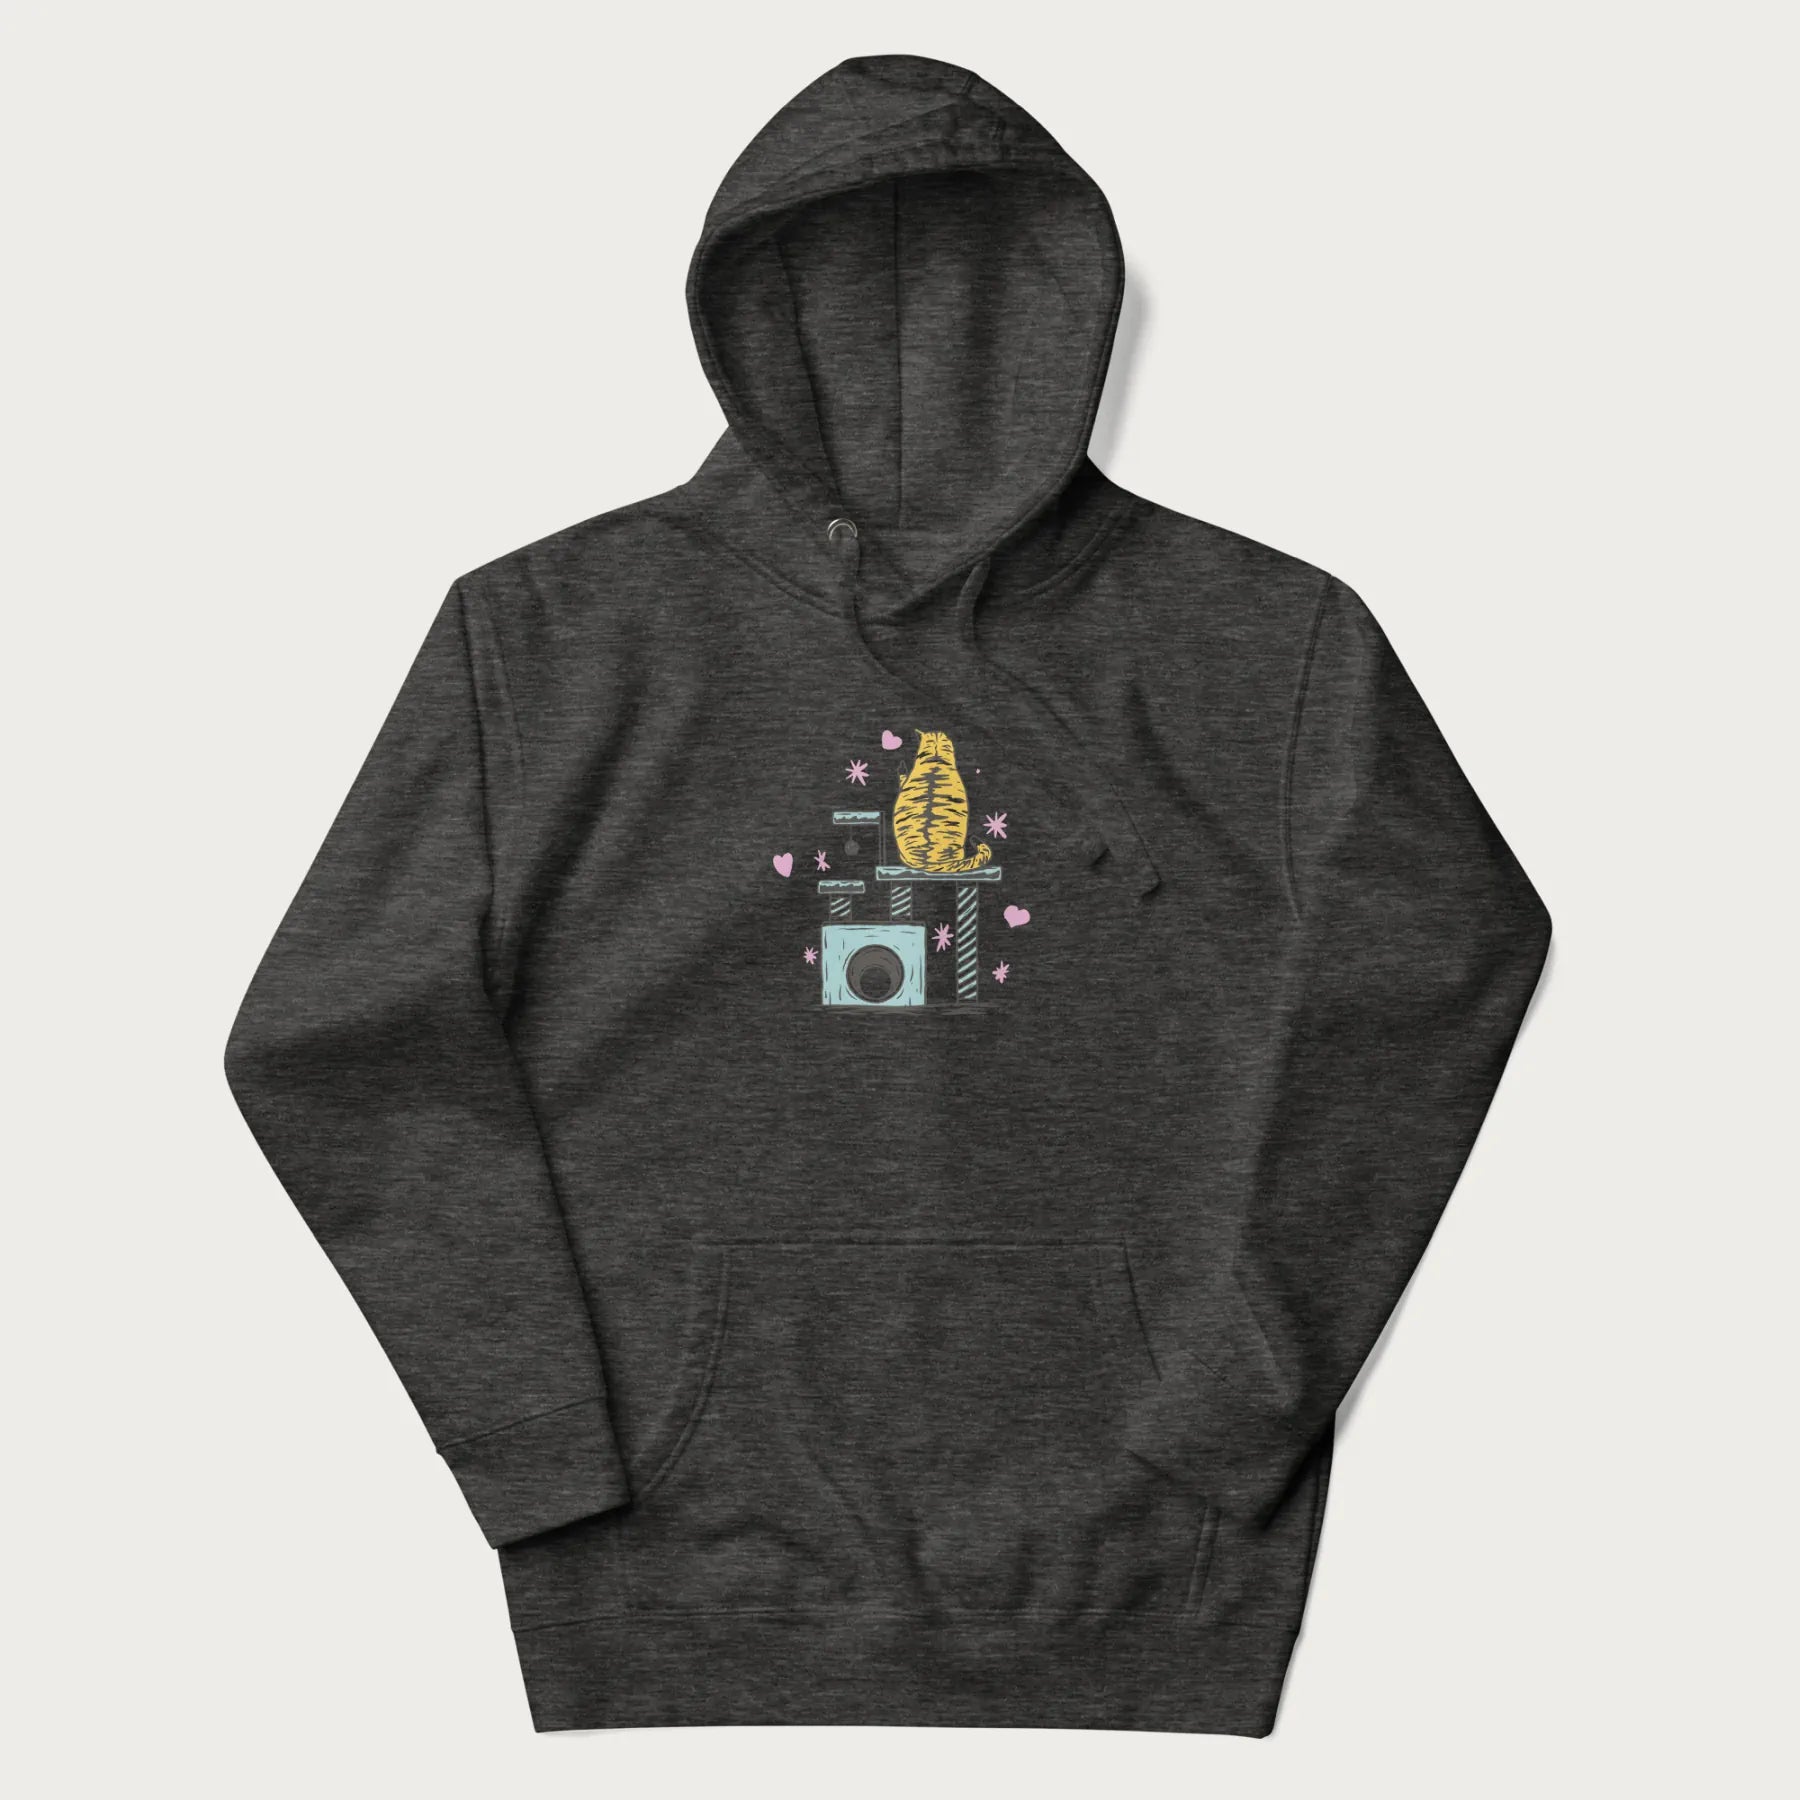 Dark grey hoodie with graphic of a tabby cat on a scratching post, raising its middle finger.